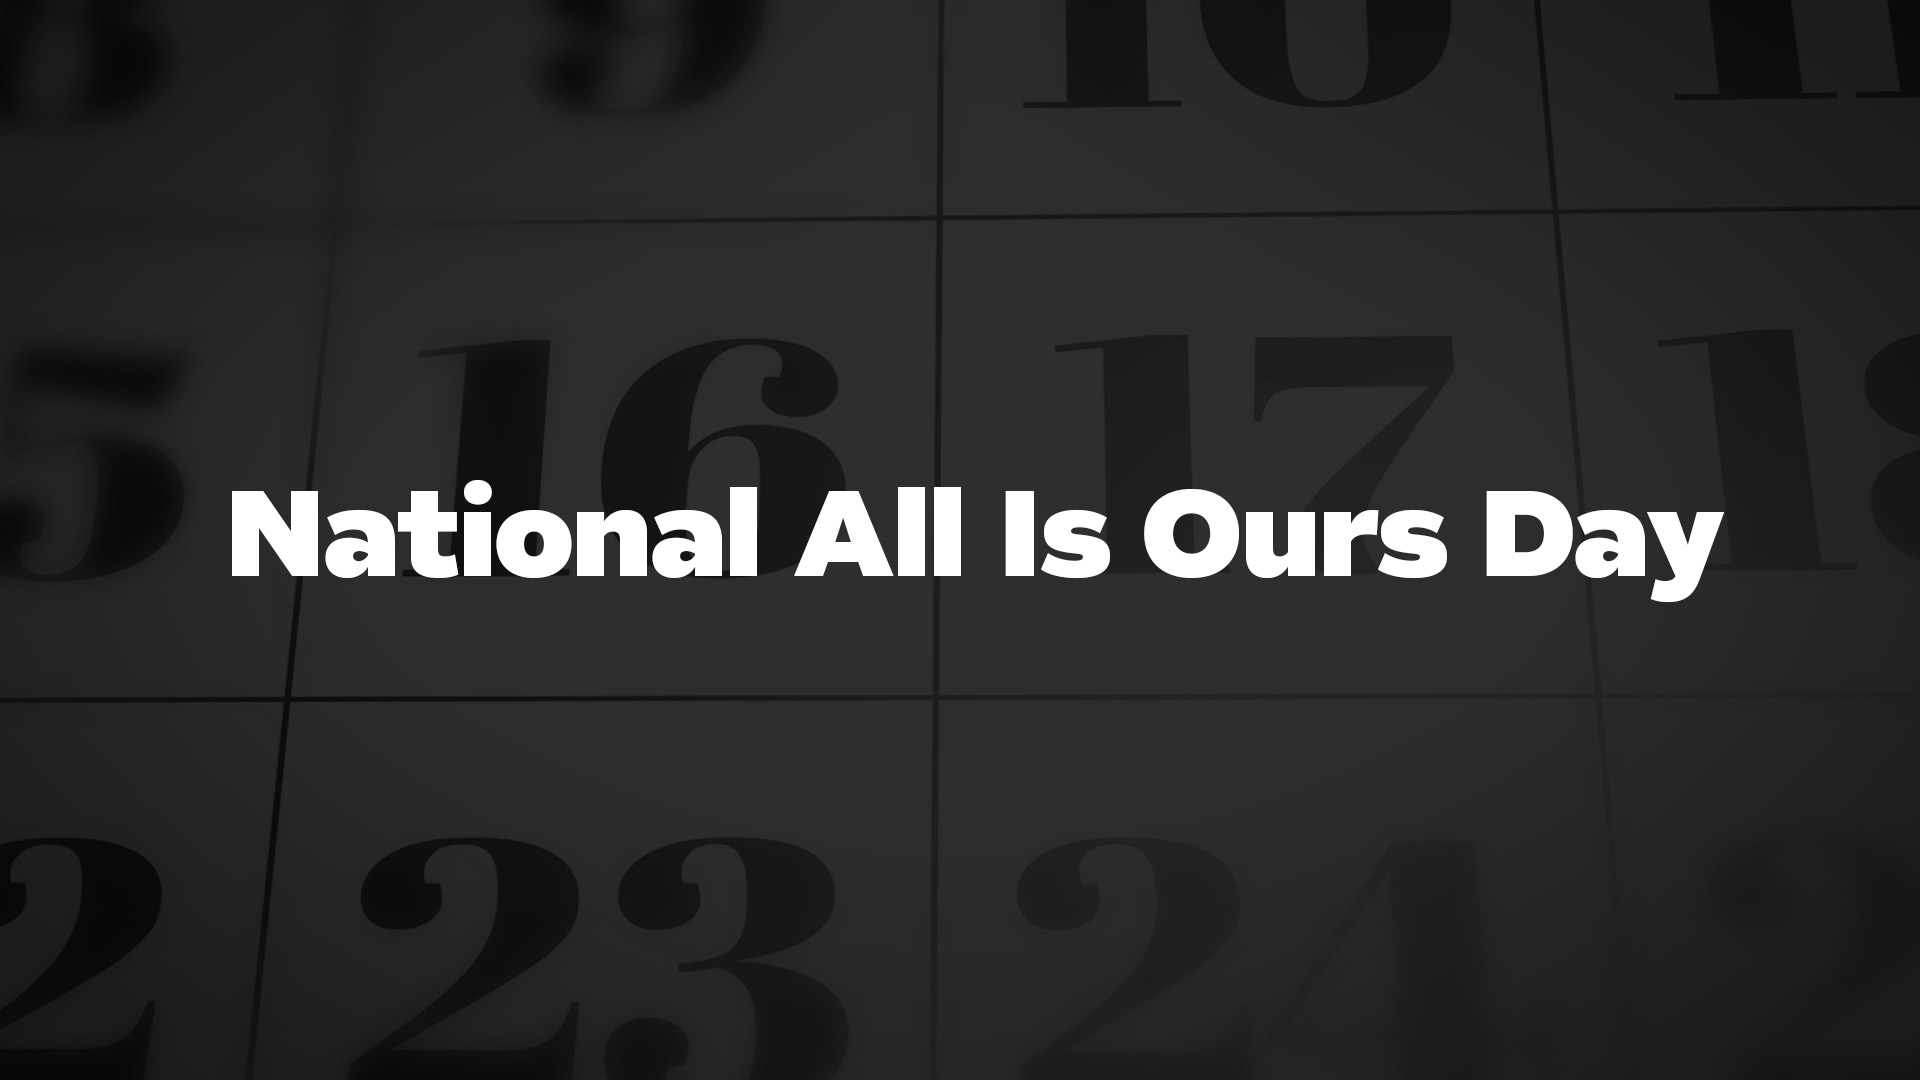 April 8 – National All is Ours Day